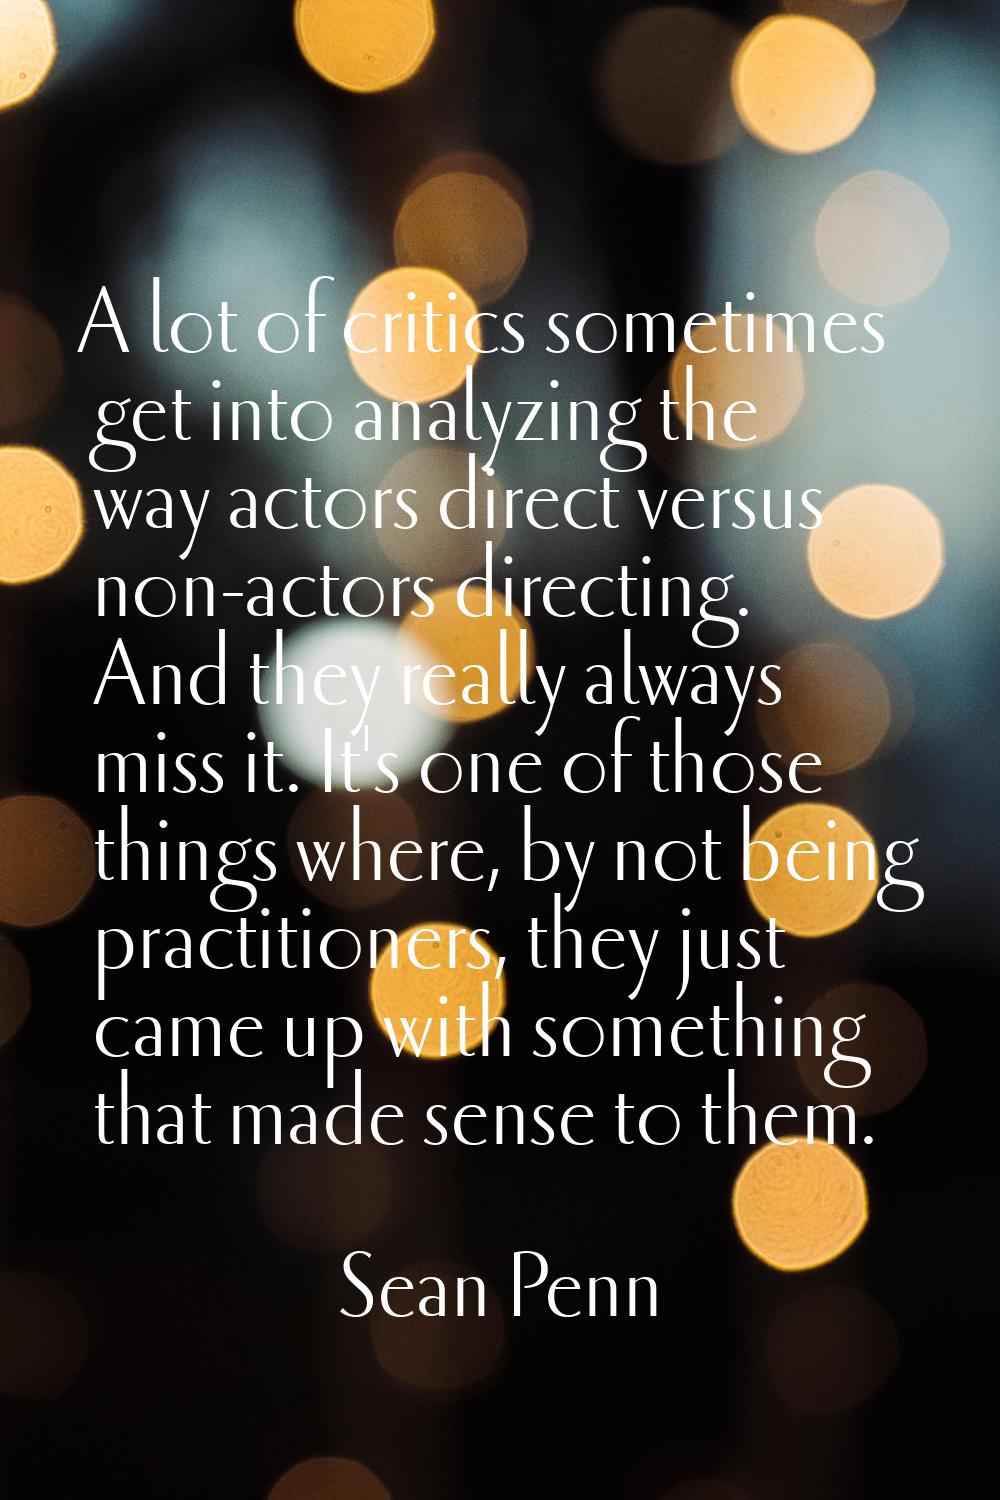 A lot of critics sometimes get into analyzing the way actors direct versus non-actors directing. An